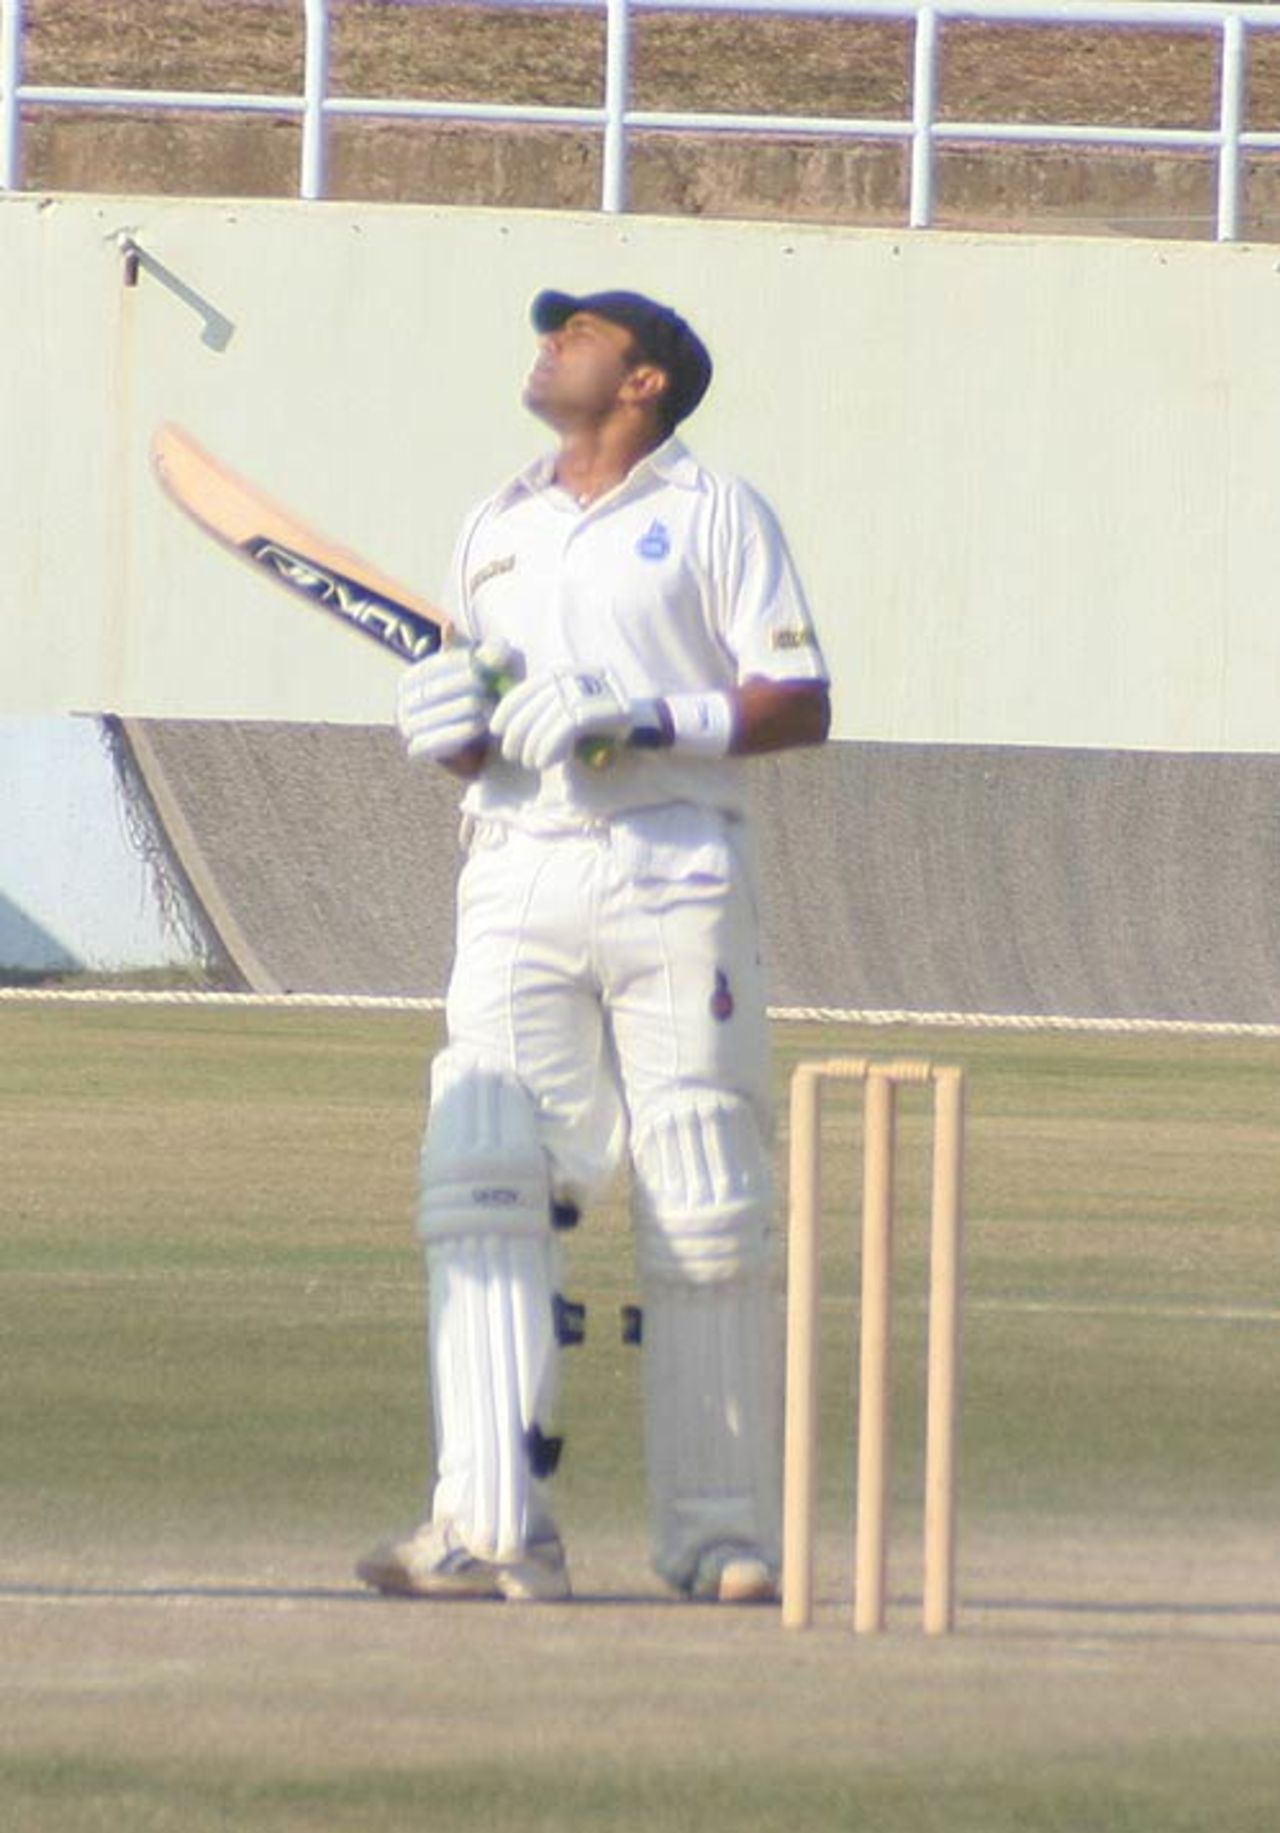 Aakash Chopra shows his relief after reaching a century, Himachal Pradesh v Delhi, Ranji Trophy Super League, 4th round, 3rd day, Dharamsala, December 3, 2007